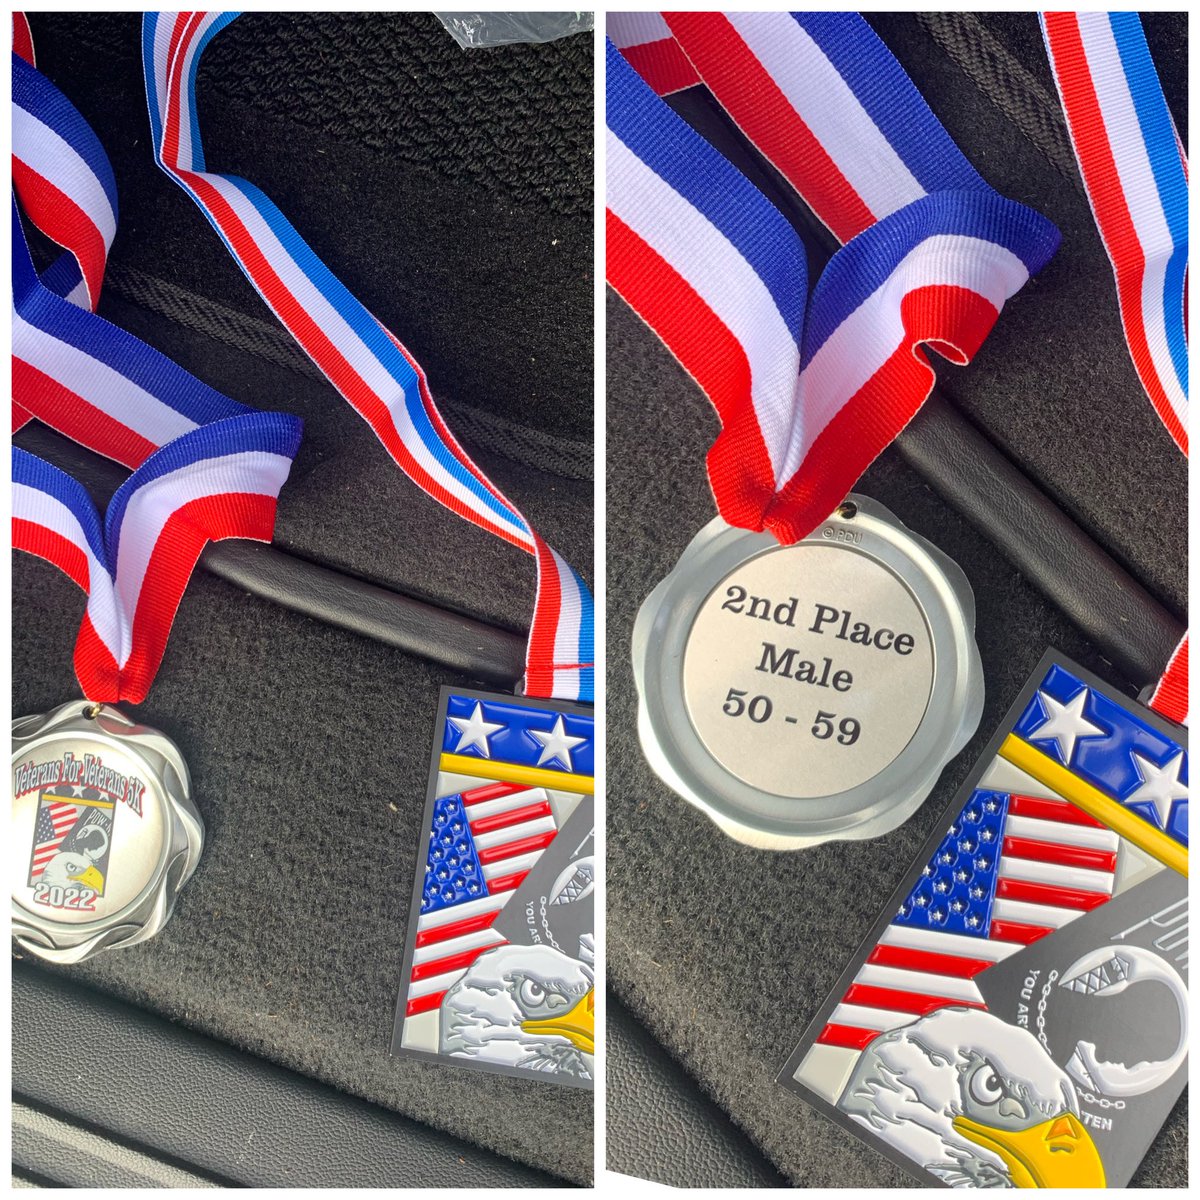 Completed the Warrior Run this morning with 2nd place in my AG.  My sister joined me this morning and it was for a great cause. #vetshelpingvets.  #healthybodyhealthymind #veteransuicideprevention #runningismytherapy #finishedwithaheartbeat #trailroadwherever #orangemudambassador